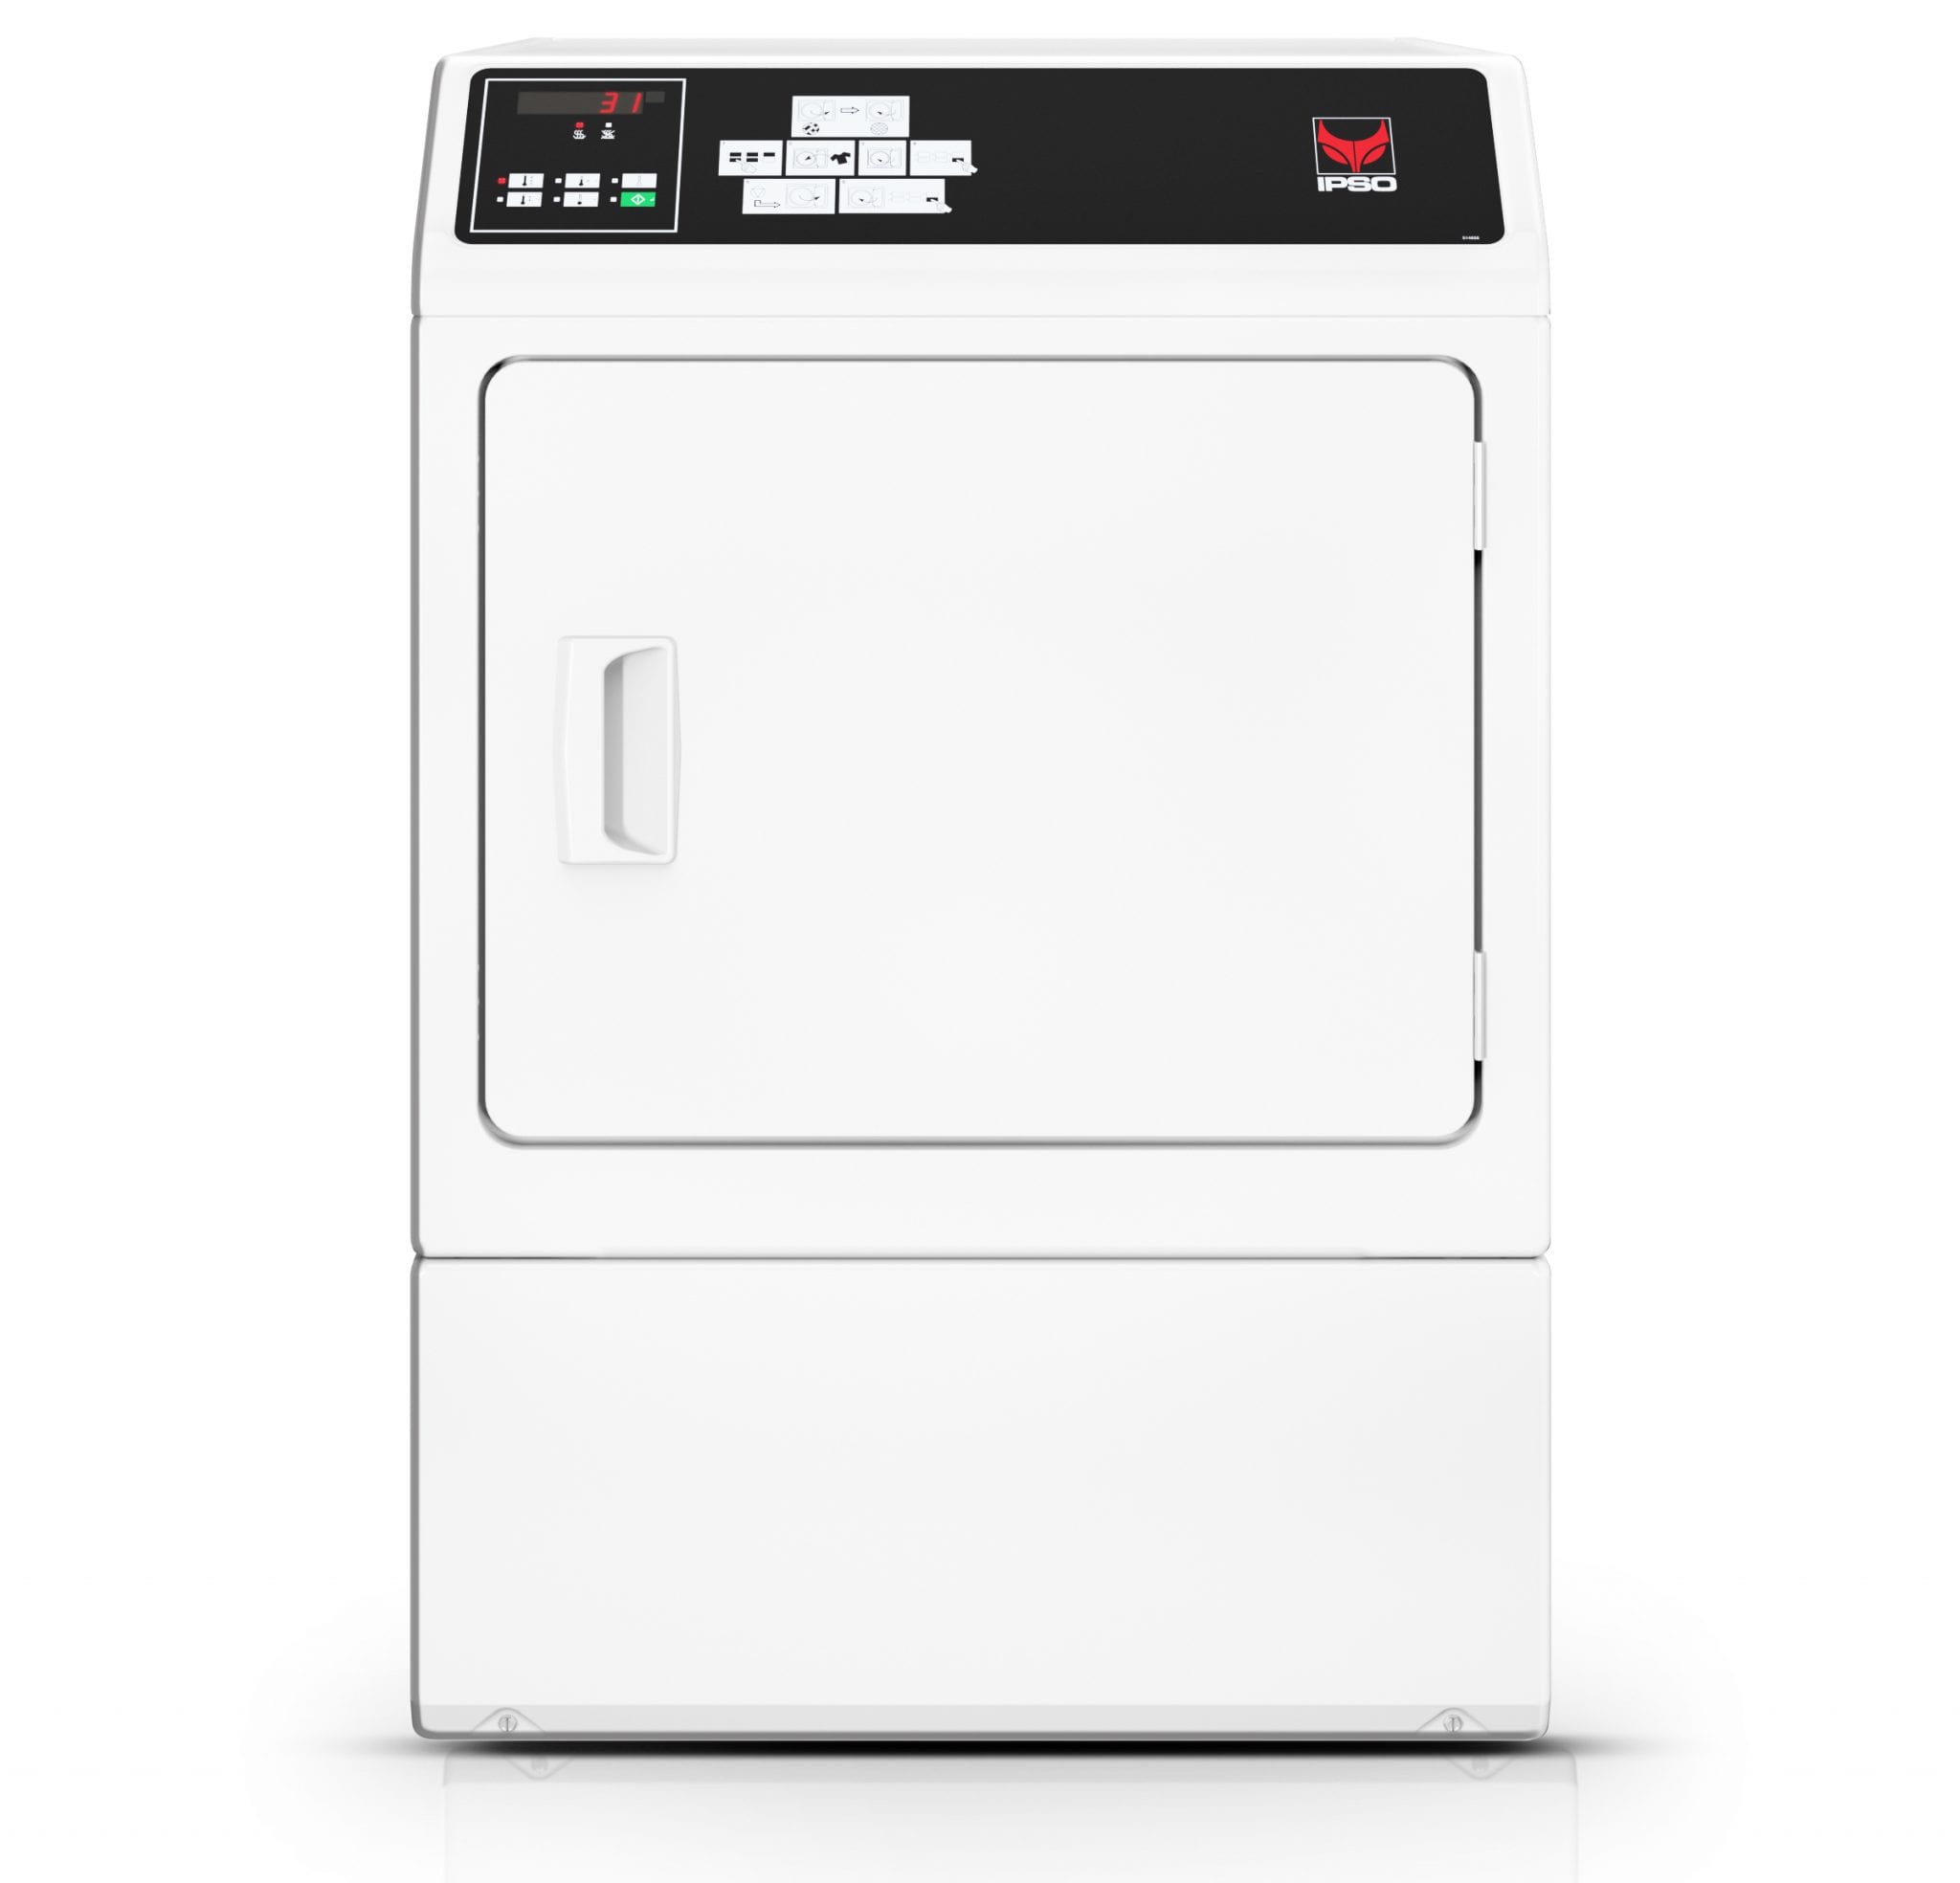 IPSO commercial laundry dryer